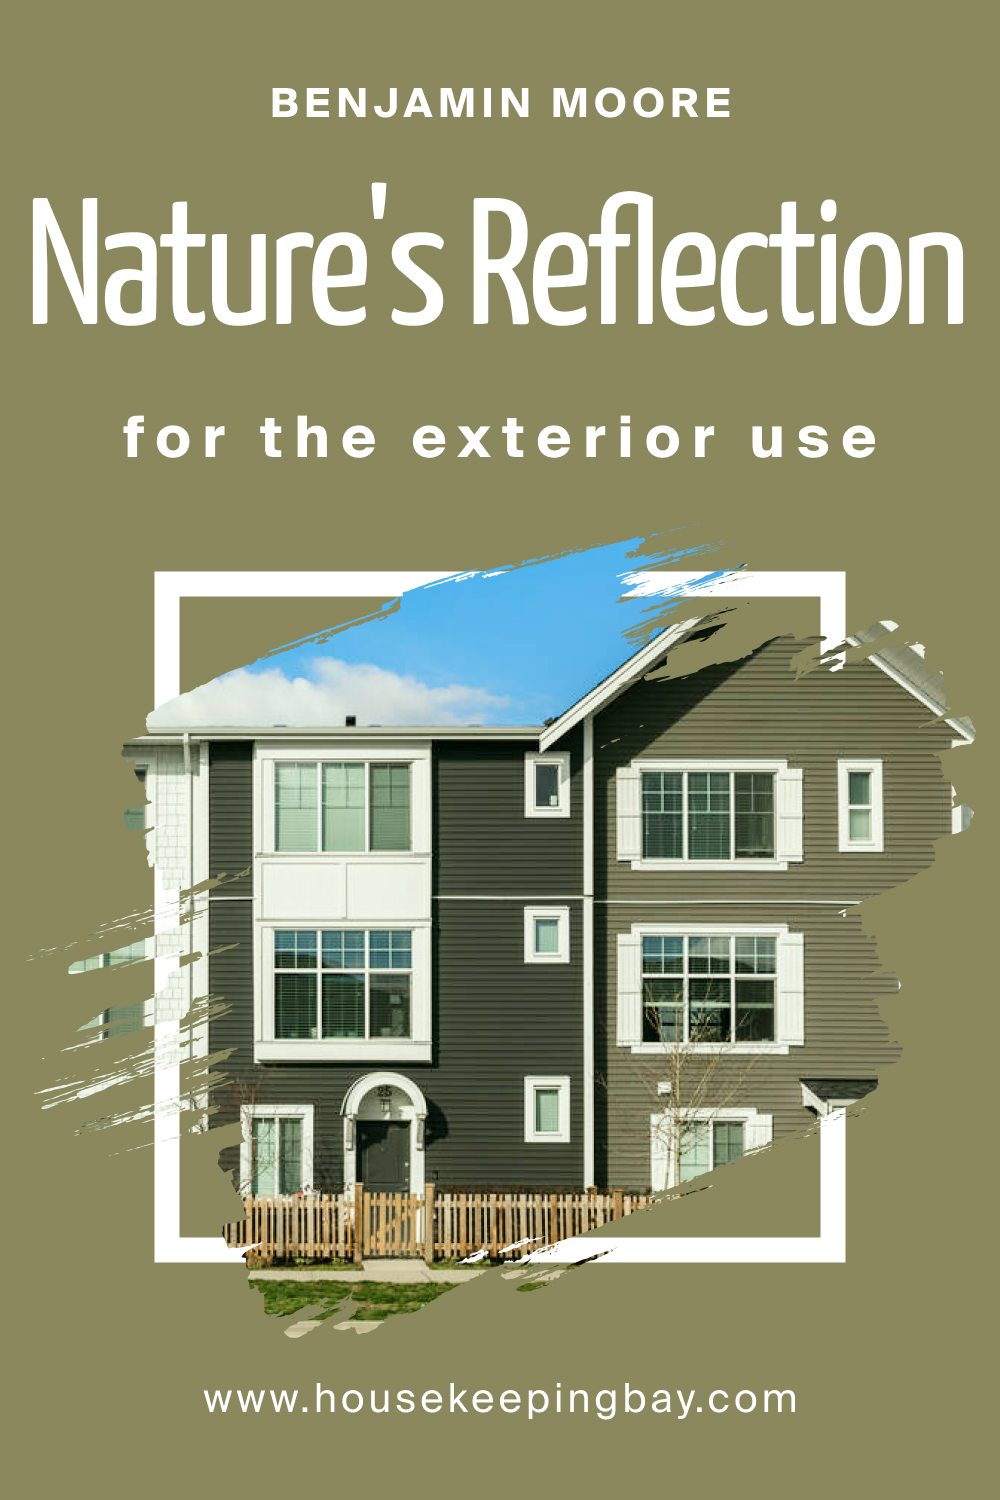 How to Use BM Nature's Reflection 504 for an Exterior?